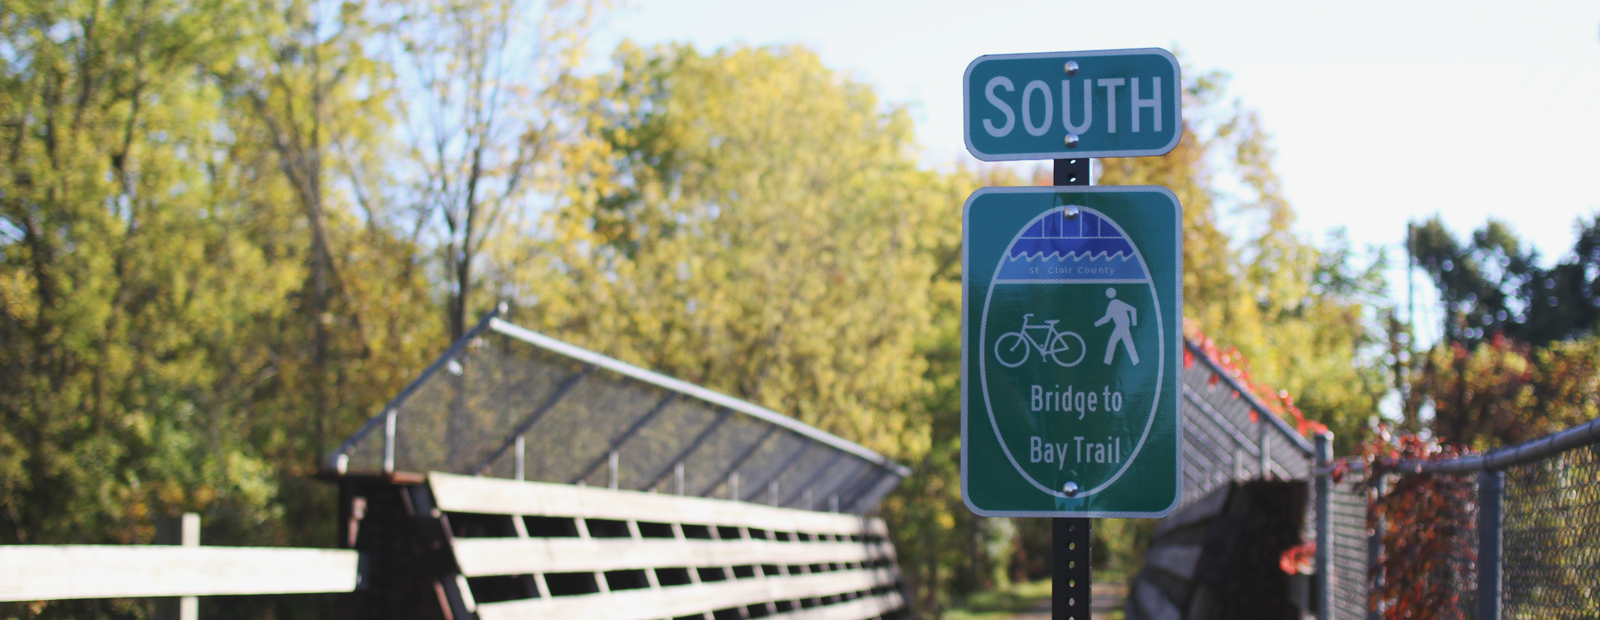 The Bridge to Bay Trail takes hikers along a scenic route.